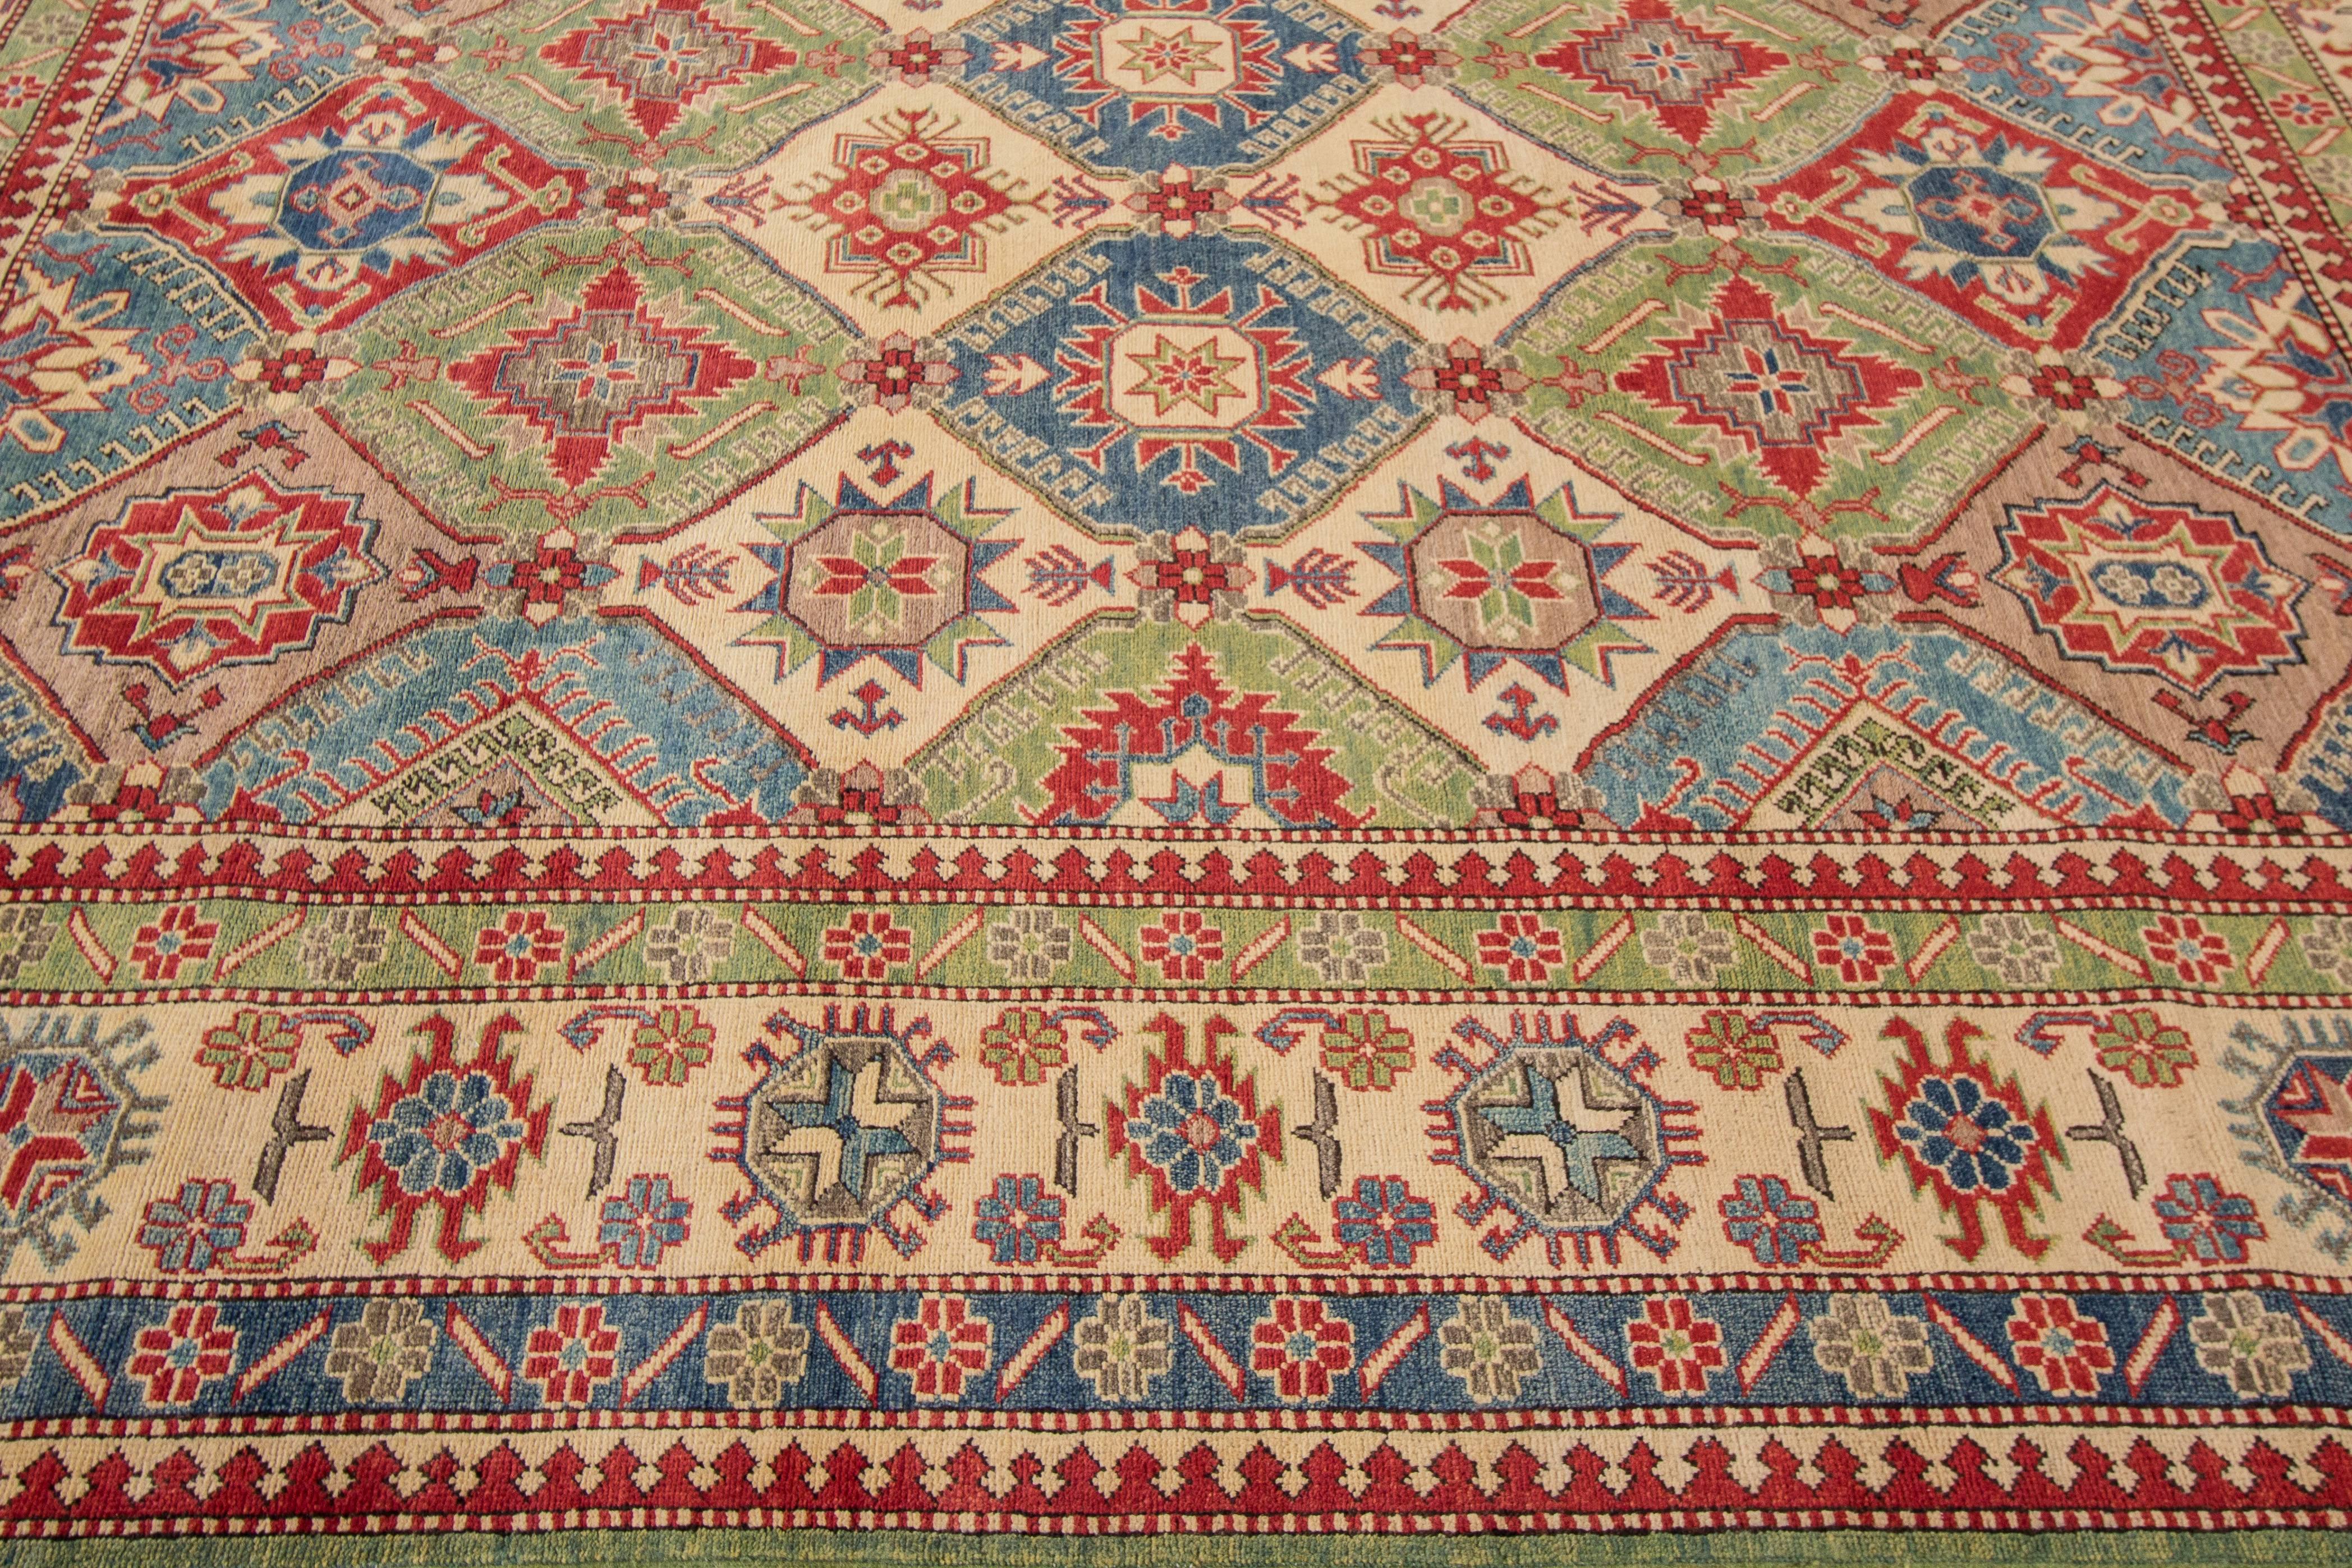 Measures: 8' x 9'.10
This beautiful hand-knotted design rug will make your floor look splendid. This collection is made in wool.